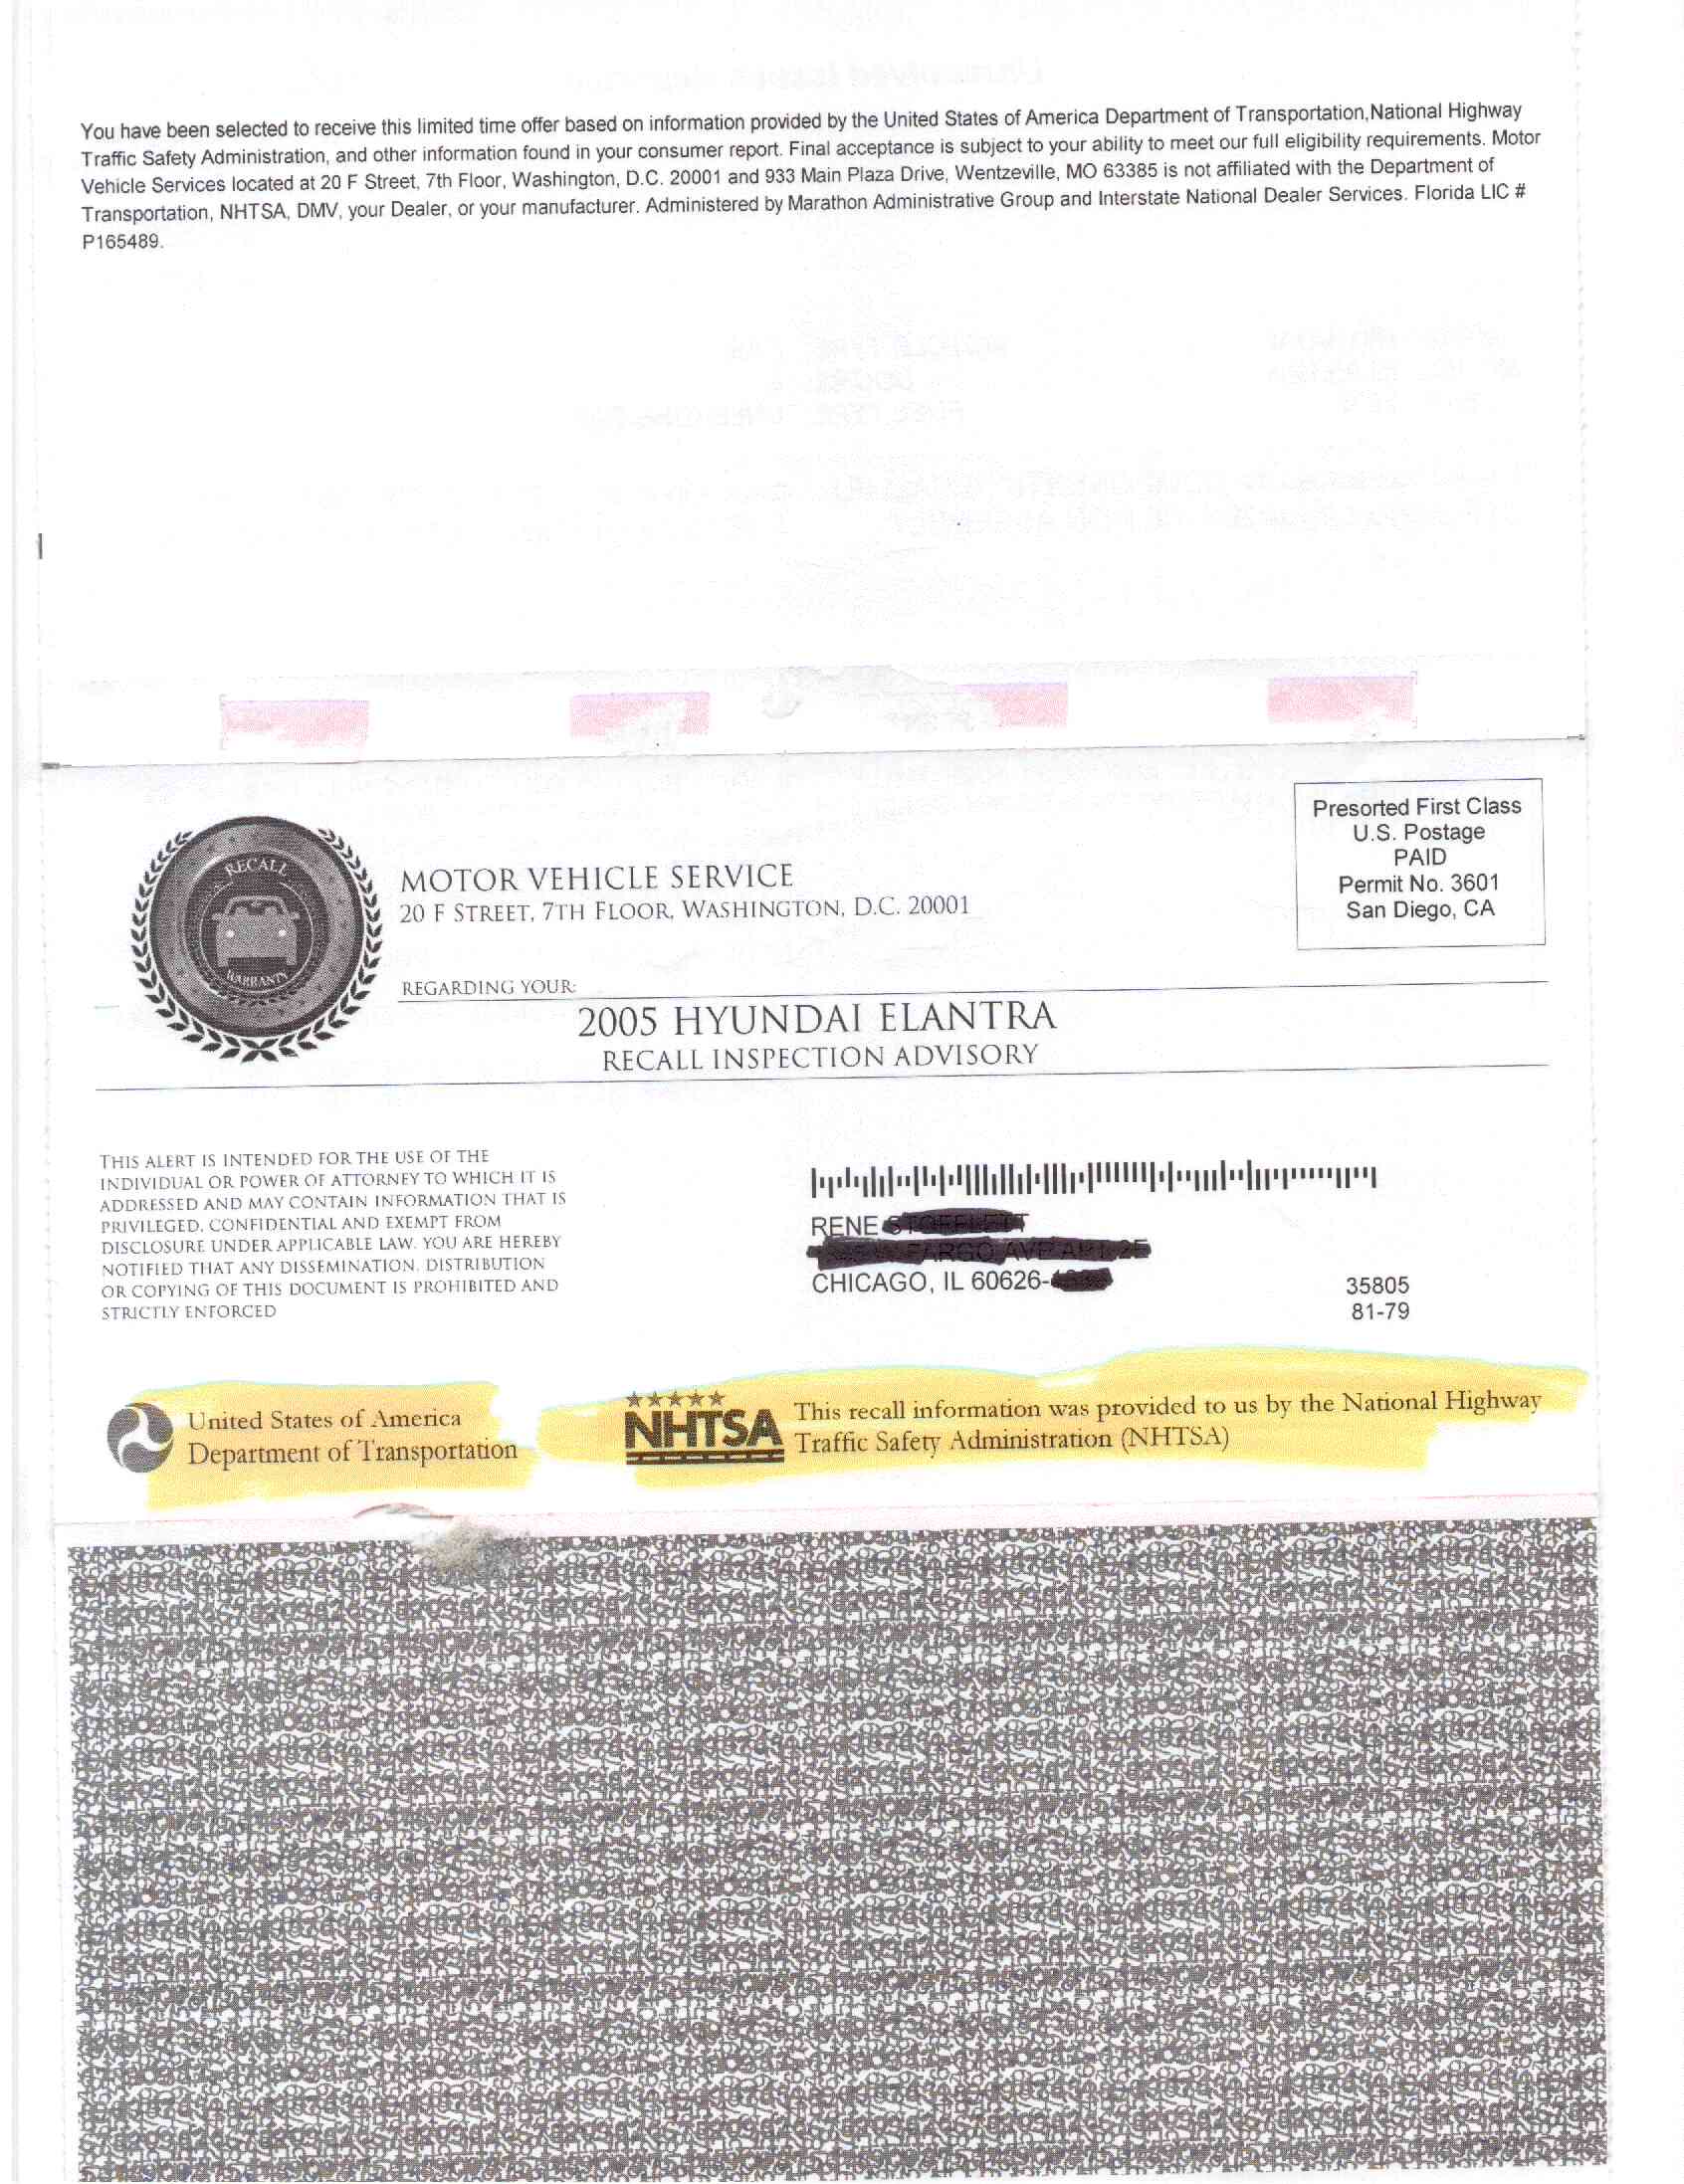 note government agencies on envelope